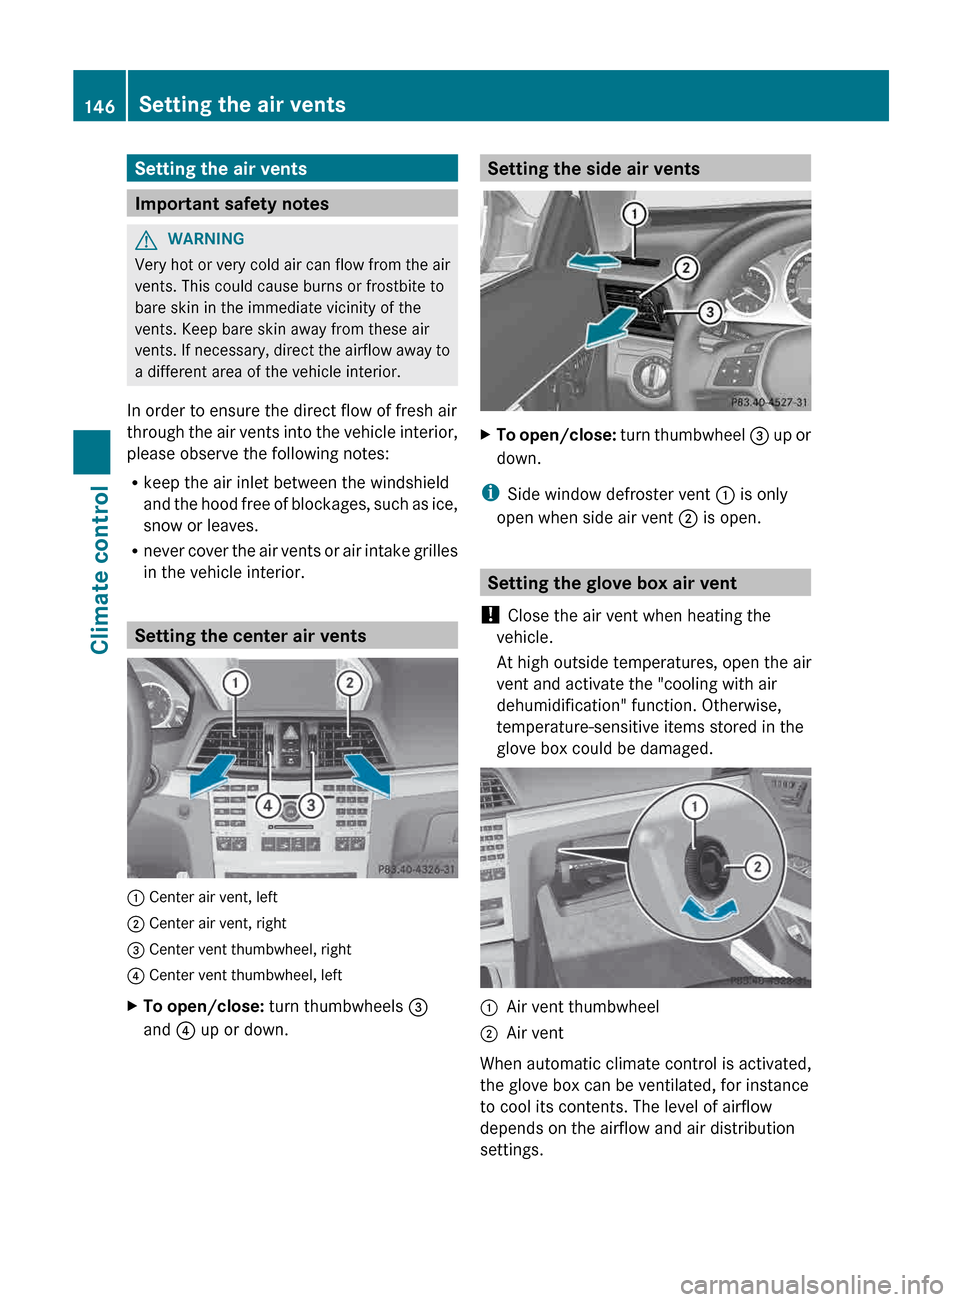 MERCEDES-BENZ E-Class CABRIOLET 2013 C207 Owners Manual Setting the air vents
Important safety notes
G
WARNING
Very hot or very cold air can flow from the air
vents. This could cause burns or frostbite to
bare skin in the immediate vicinity of the
vents. K